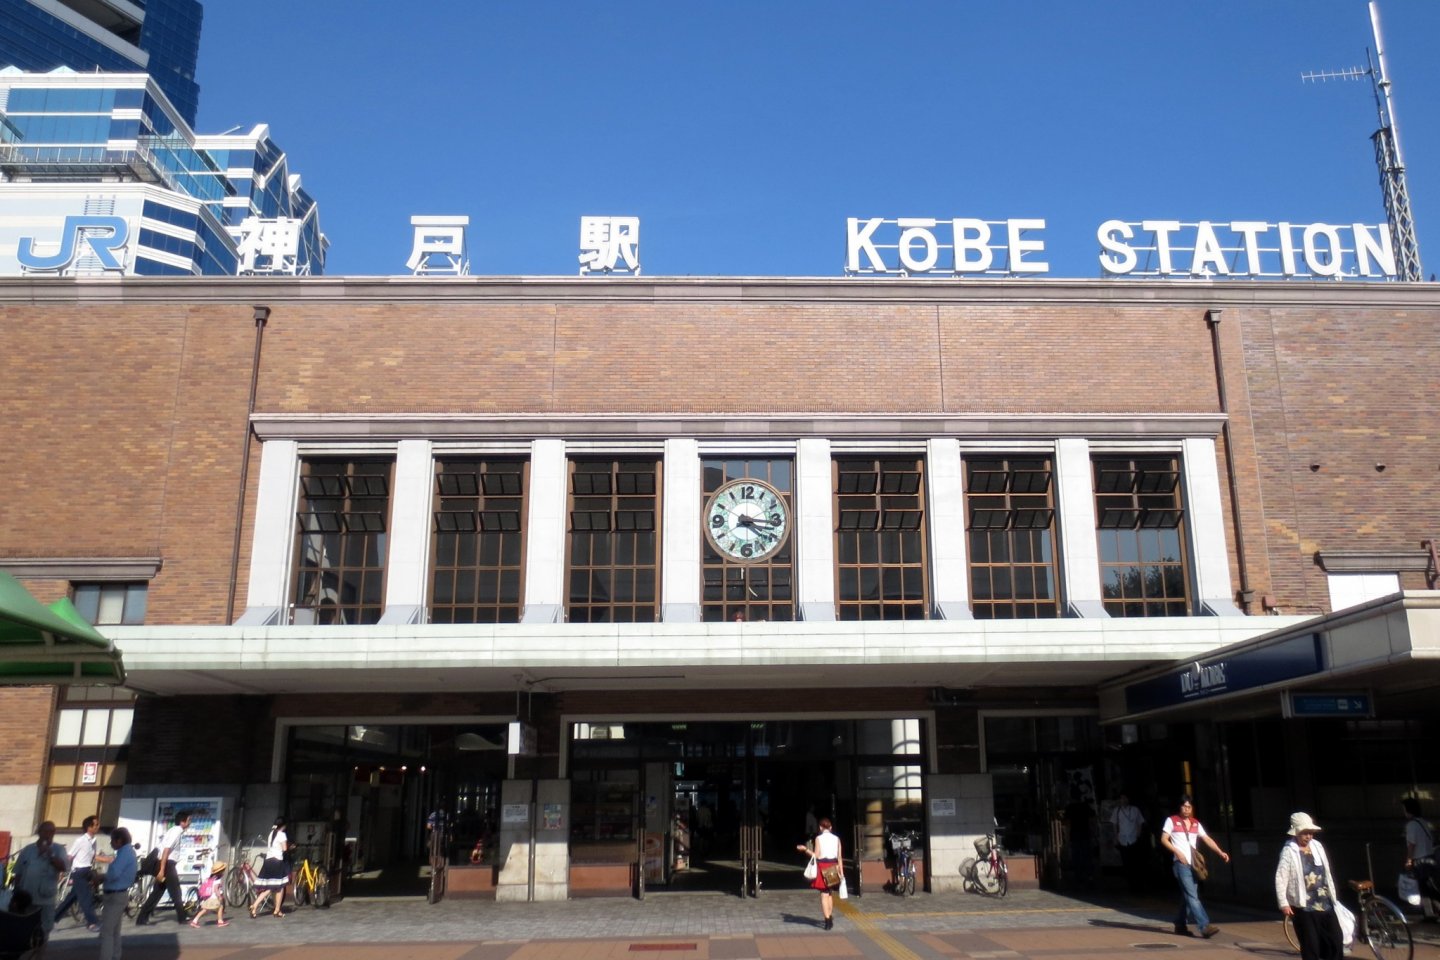 The northern entrance to Kobe Station